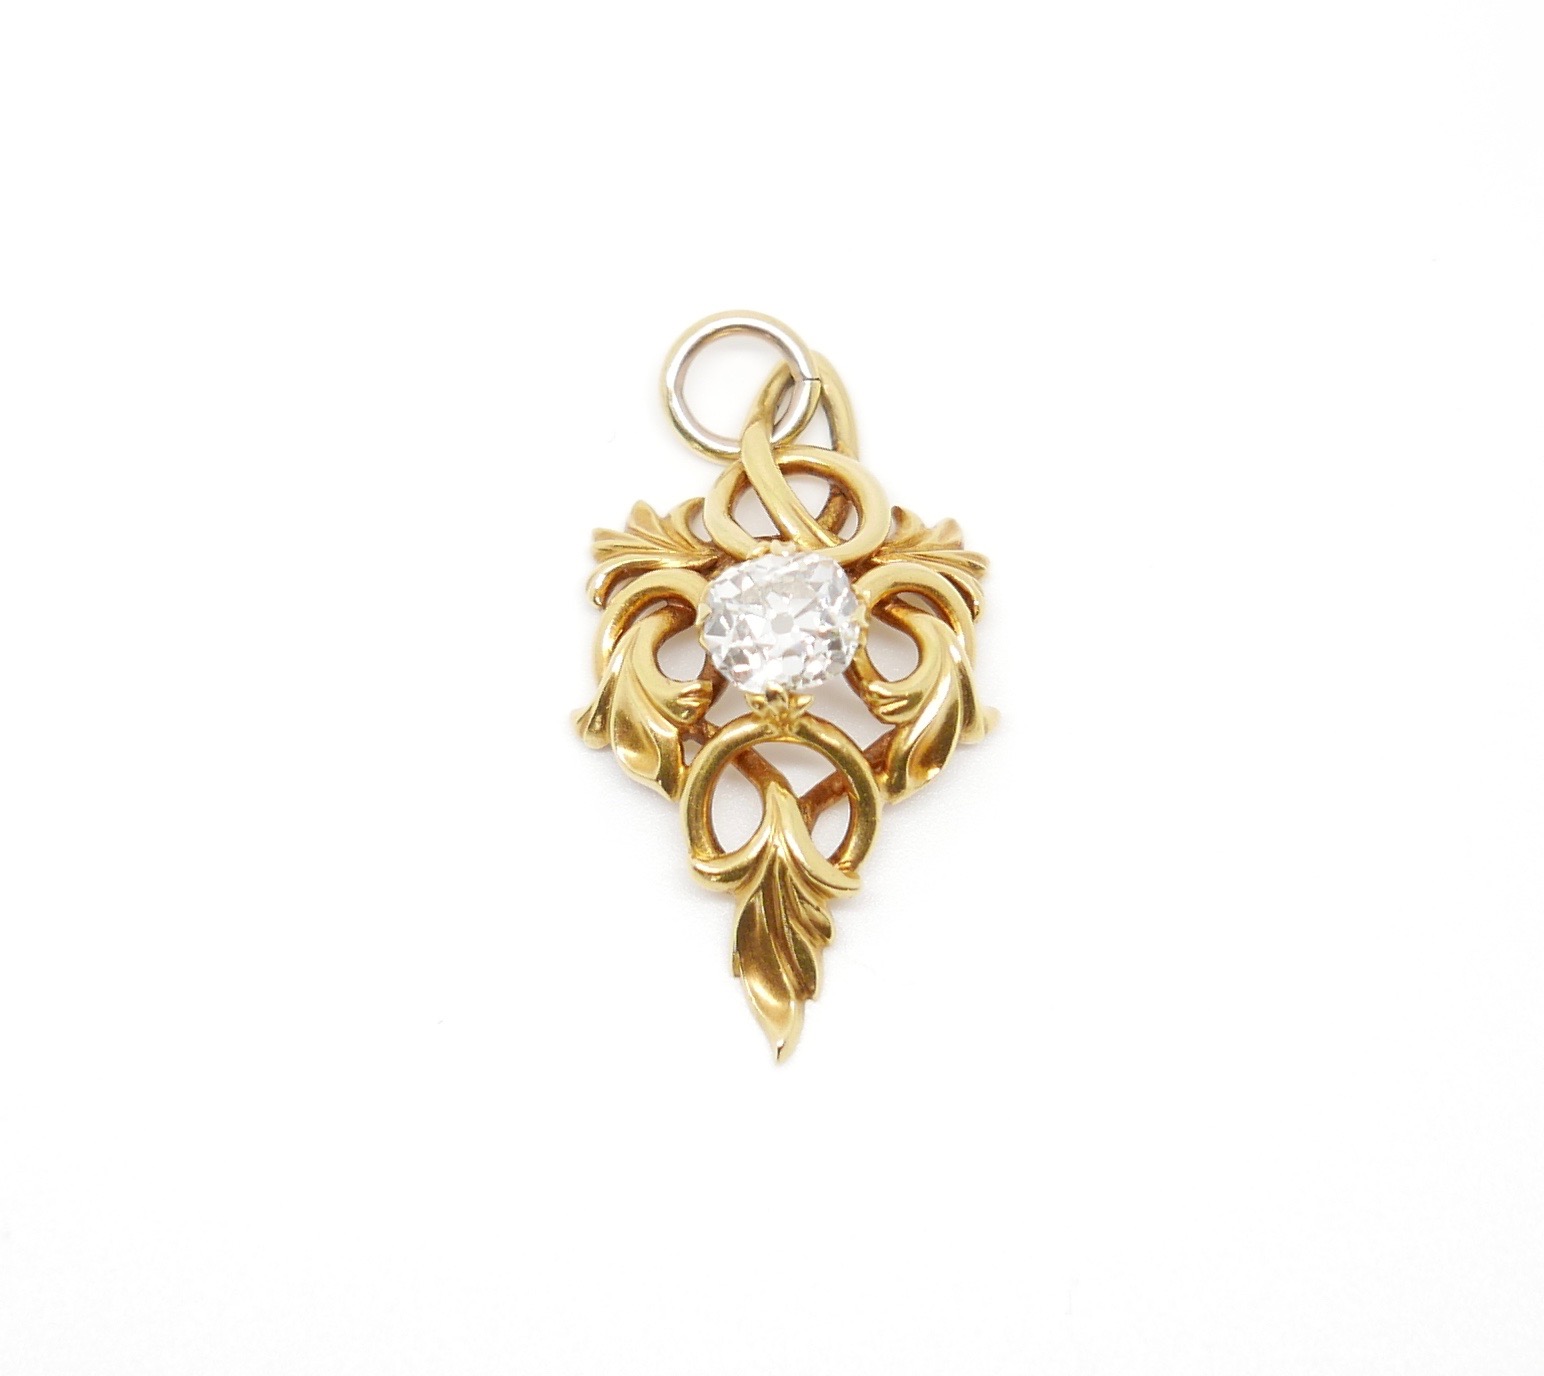 Antique Jewellery Boutique | Vintage Jewellery and Antique Jewellery ...